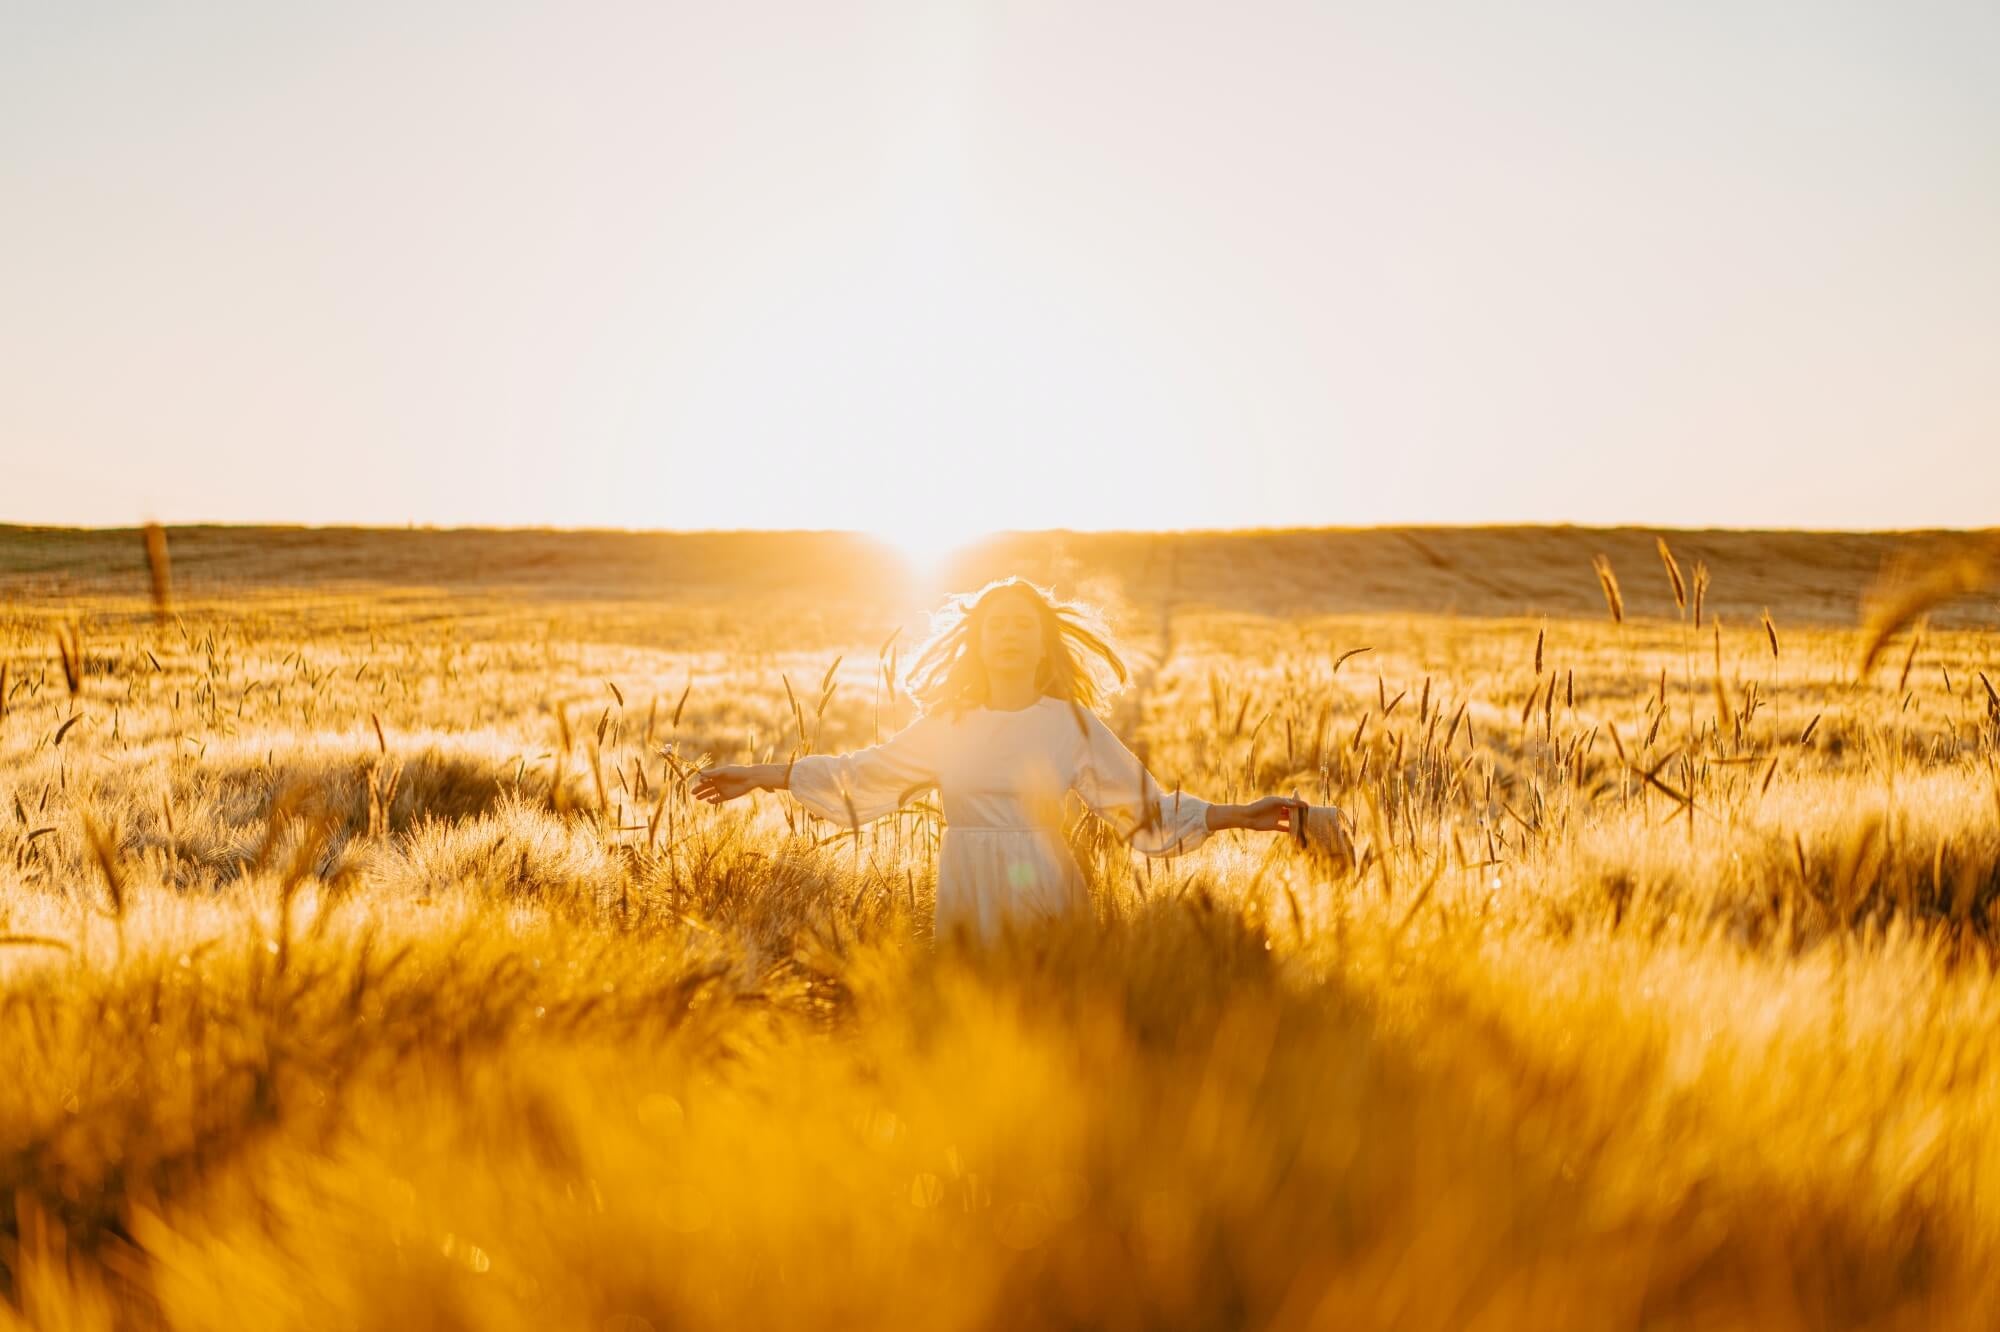 young-beautiful-woman-with-long-blond-hair-white-dress-wheat-field-early-morning-sunrise-summer-is-time-dreamers-flying-hair-woman-running-across-field-rays_1_1_8bb9fc37-b312-4dd0-aecb-4ea67a08960f.jpg